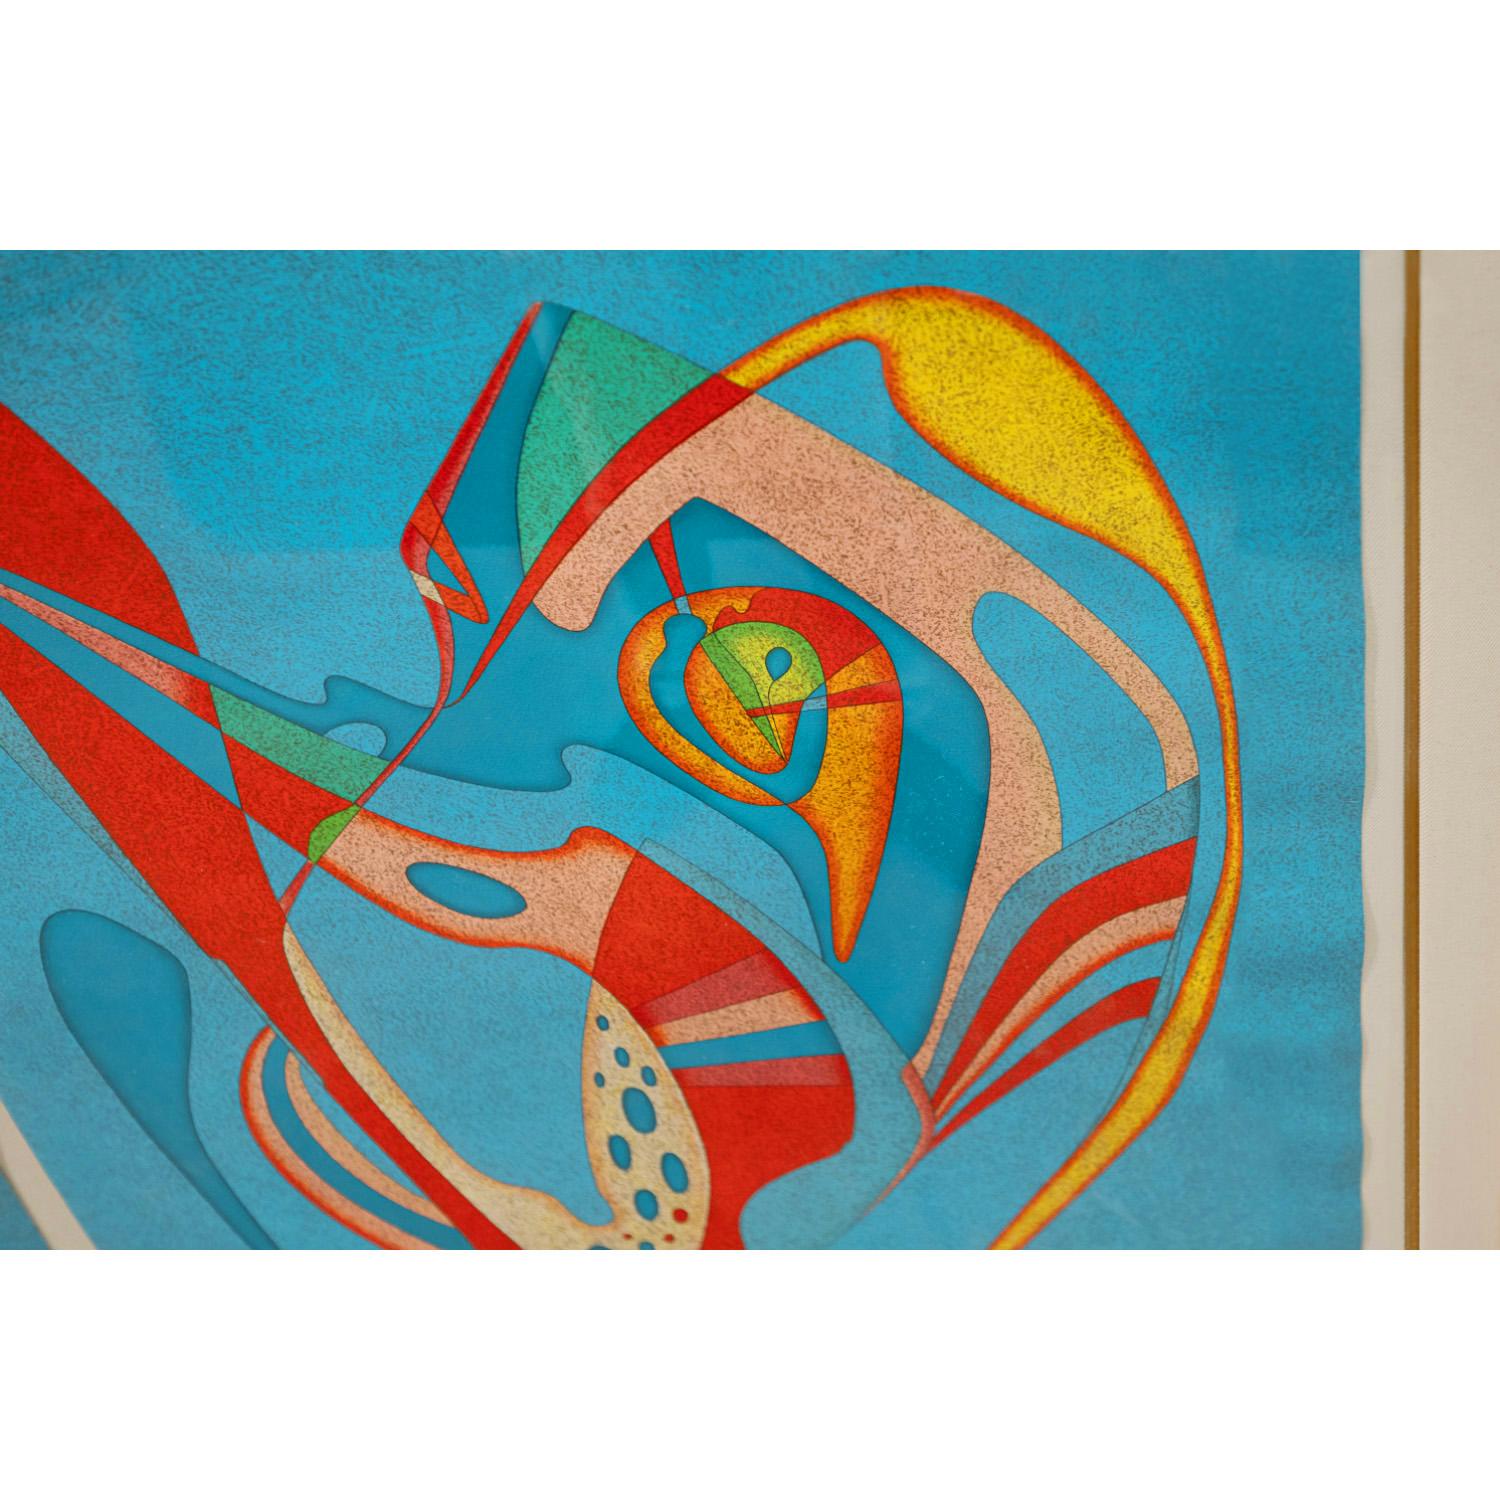 Modern M. Chemiakin Large Abstract Pair of Lithographs 1989 (Signed and Numbered) For Sale